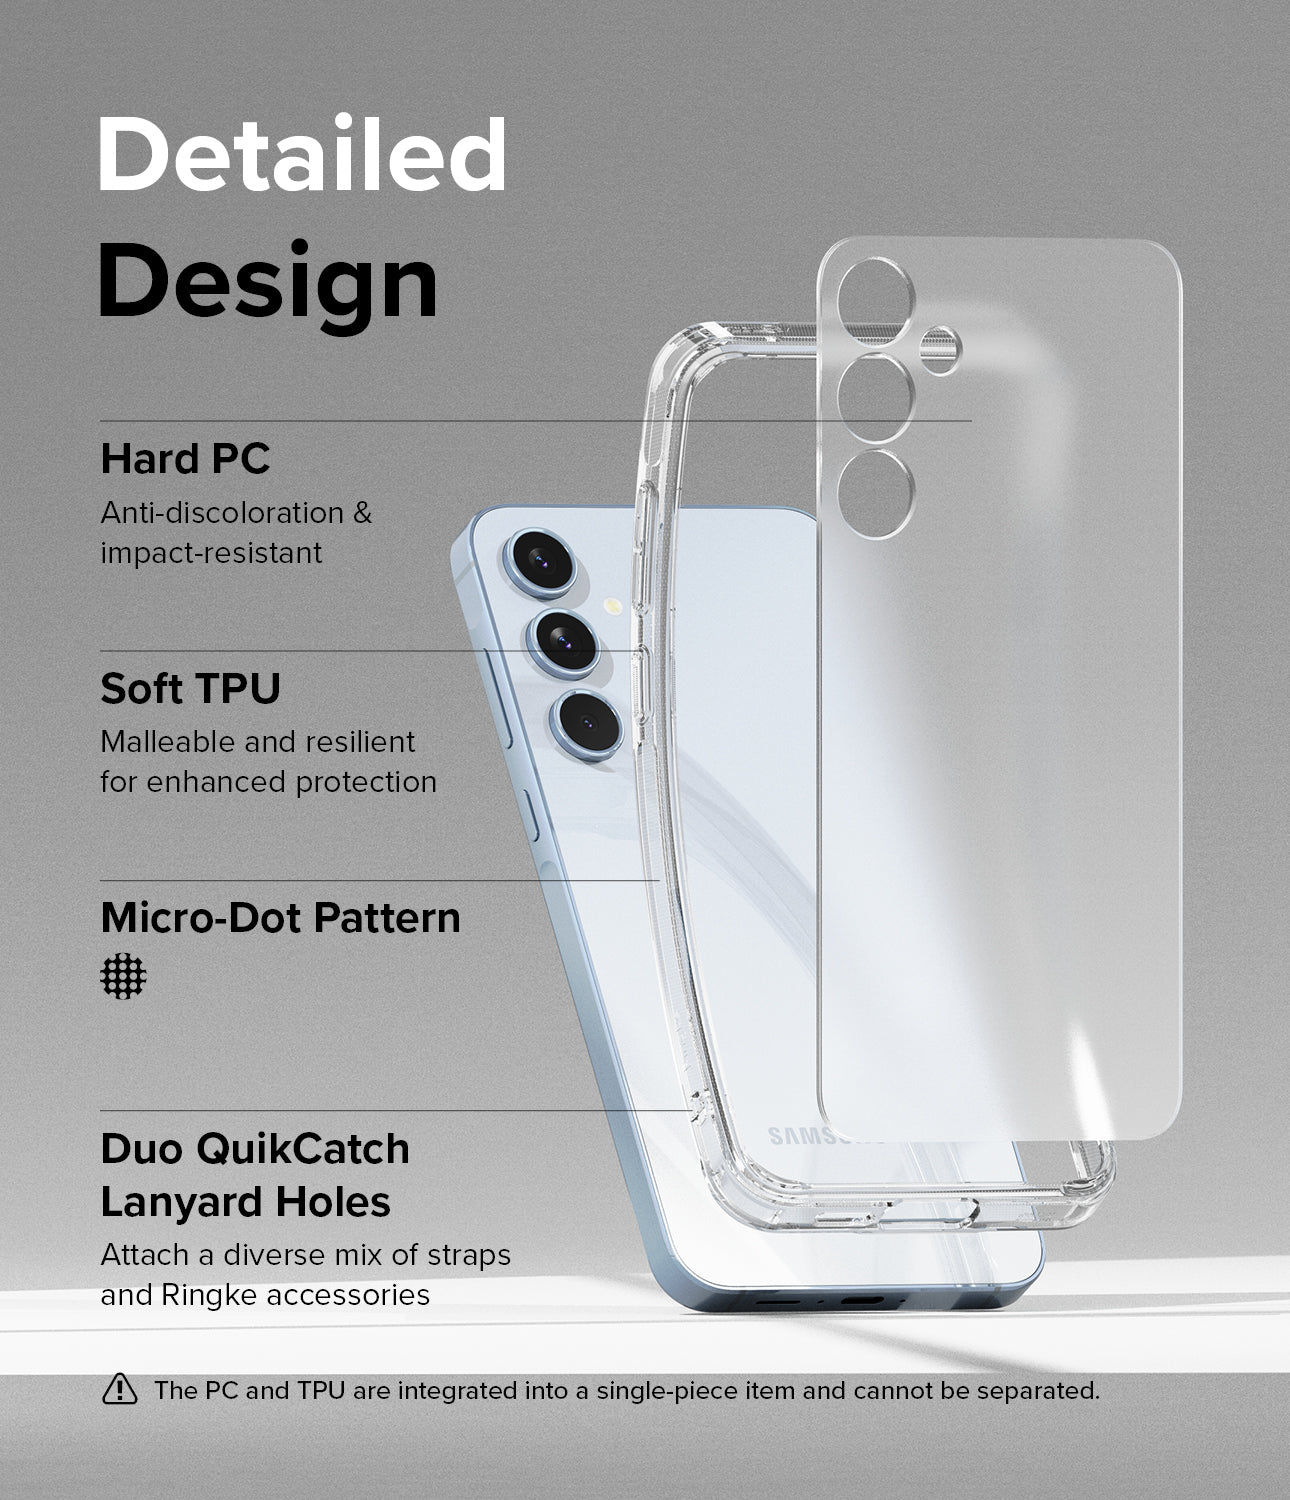 Galaxy A55 Case | Fusion Matte - Detailed Design. Anti-discoloration and impact with Hard PC. Malleable and resilient for enhanced protection with Soft TPU. Micro-Dot Pattern. Duo QuikCatch Lanyard Holes. Attach a diverse mix of straps and Ringke accesories.